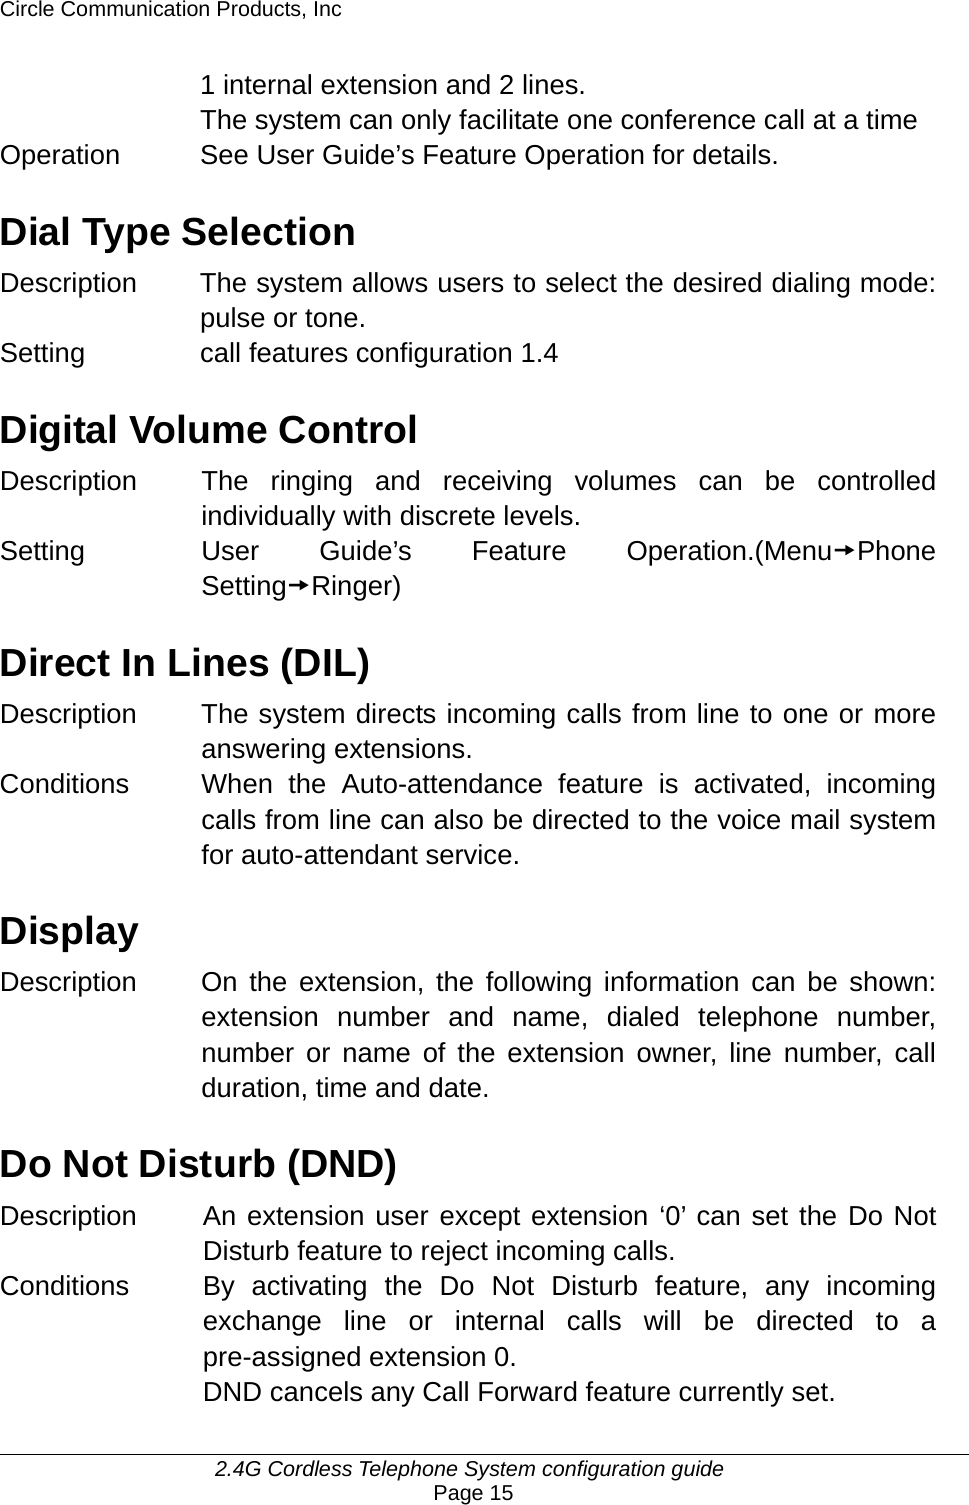 Circle Communication Products, Inc     2.4G Cordless Telephone System configuration guide Page 15 1 internal extension and 2 lines. The system can only facilitate one conference call at a time Operation  See User Guide’s Feature Operation for details.  Dial Type Selection Description  The system allows users to select the desired dialing mode: pulse or tone. Setting call features configuration 1.4  Digital Volume Control Description  The ringing and receiving volumes can be controlled individually with discrete levels. Setting  User Guide’s Feature Operation.(MenutPhone SettingtRinger)  Direct In Lines (DIL) Description The system directs incoming calls from line to one or more answering extensions. Conditions When the Auto-attendance feature is activated, incoming calls from line can also be directed to the voice mail system for auto-attendant service.  Display Description  On the extension, the following information can be shown: extension number and name, dialed telephone number, number or name of the extension owner, line number, call duration, time and date.    Do Not Disturb (DND) Description  An extension user except extension ‘0’ can set the Do Not Disturb feature to reject incoming calls. Conditions  By activating the Do Not Disturb feature, any incoming exchange line or internal calls will be directed to a pre-assigned extension 0.   DND cancels any Call Forward feature currently set.   